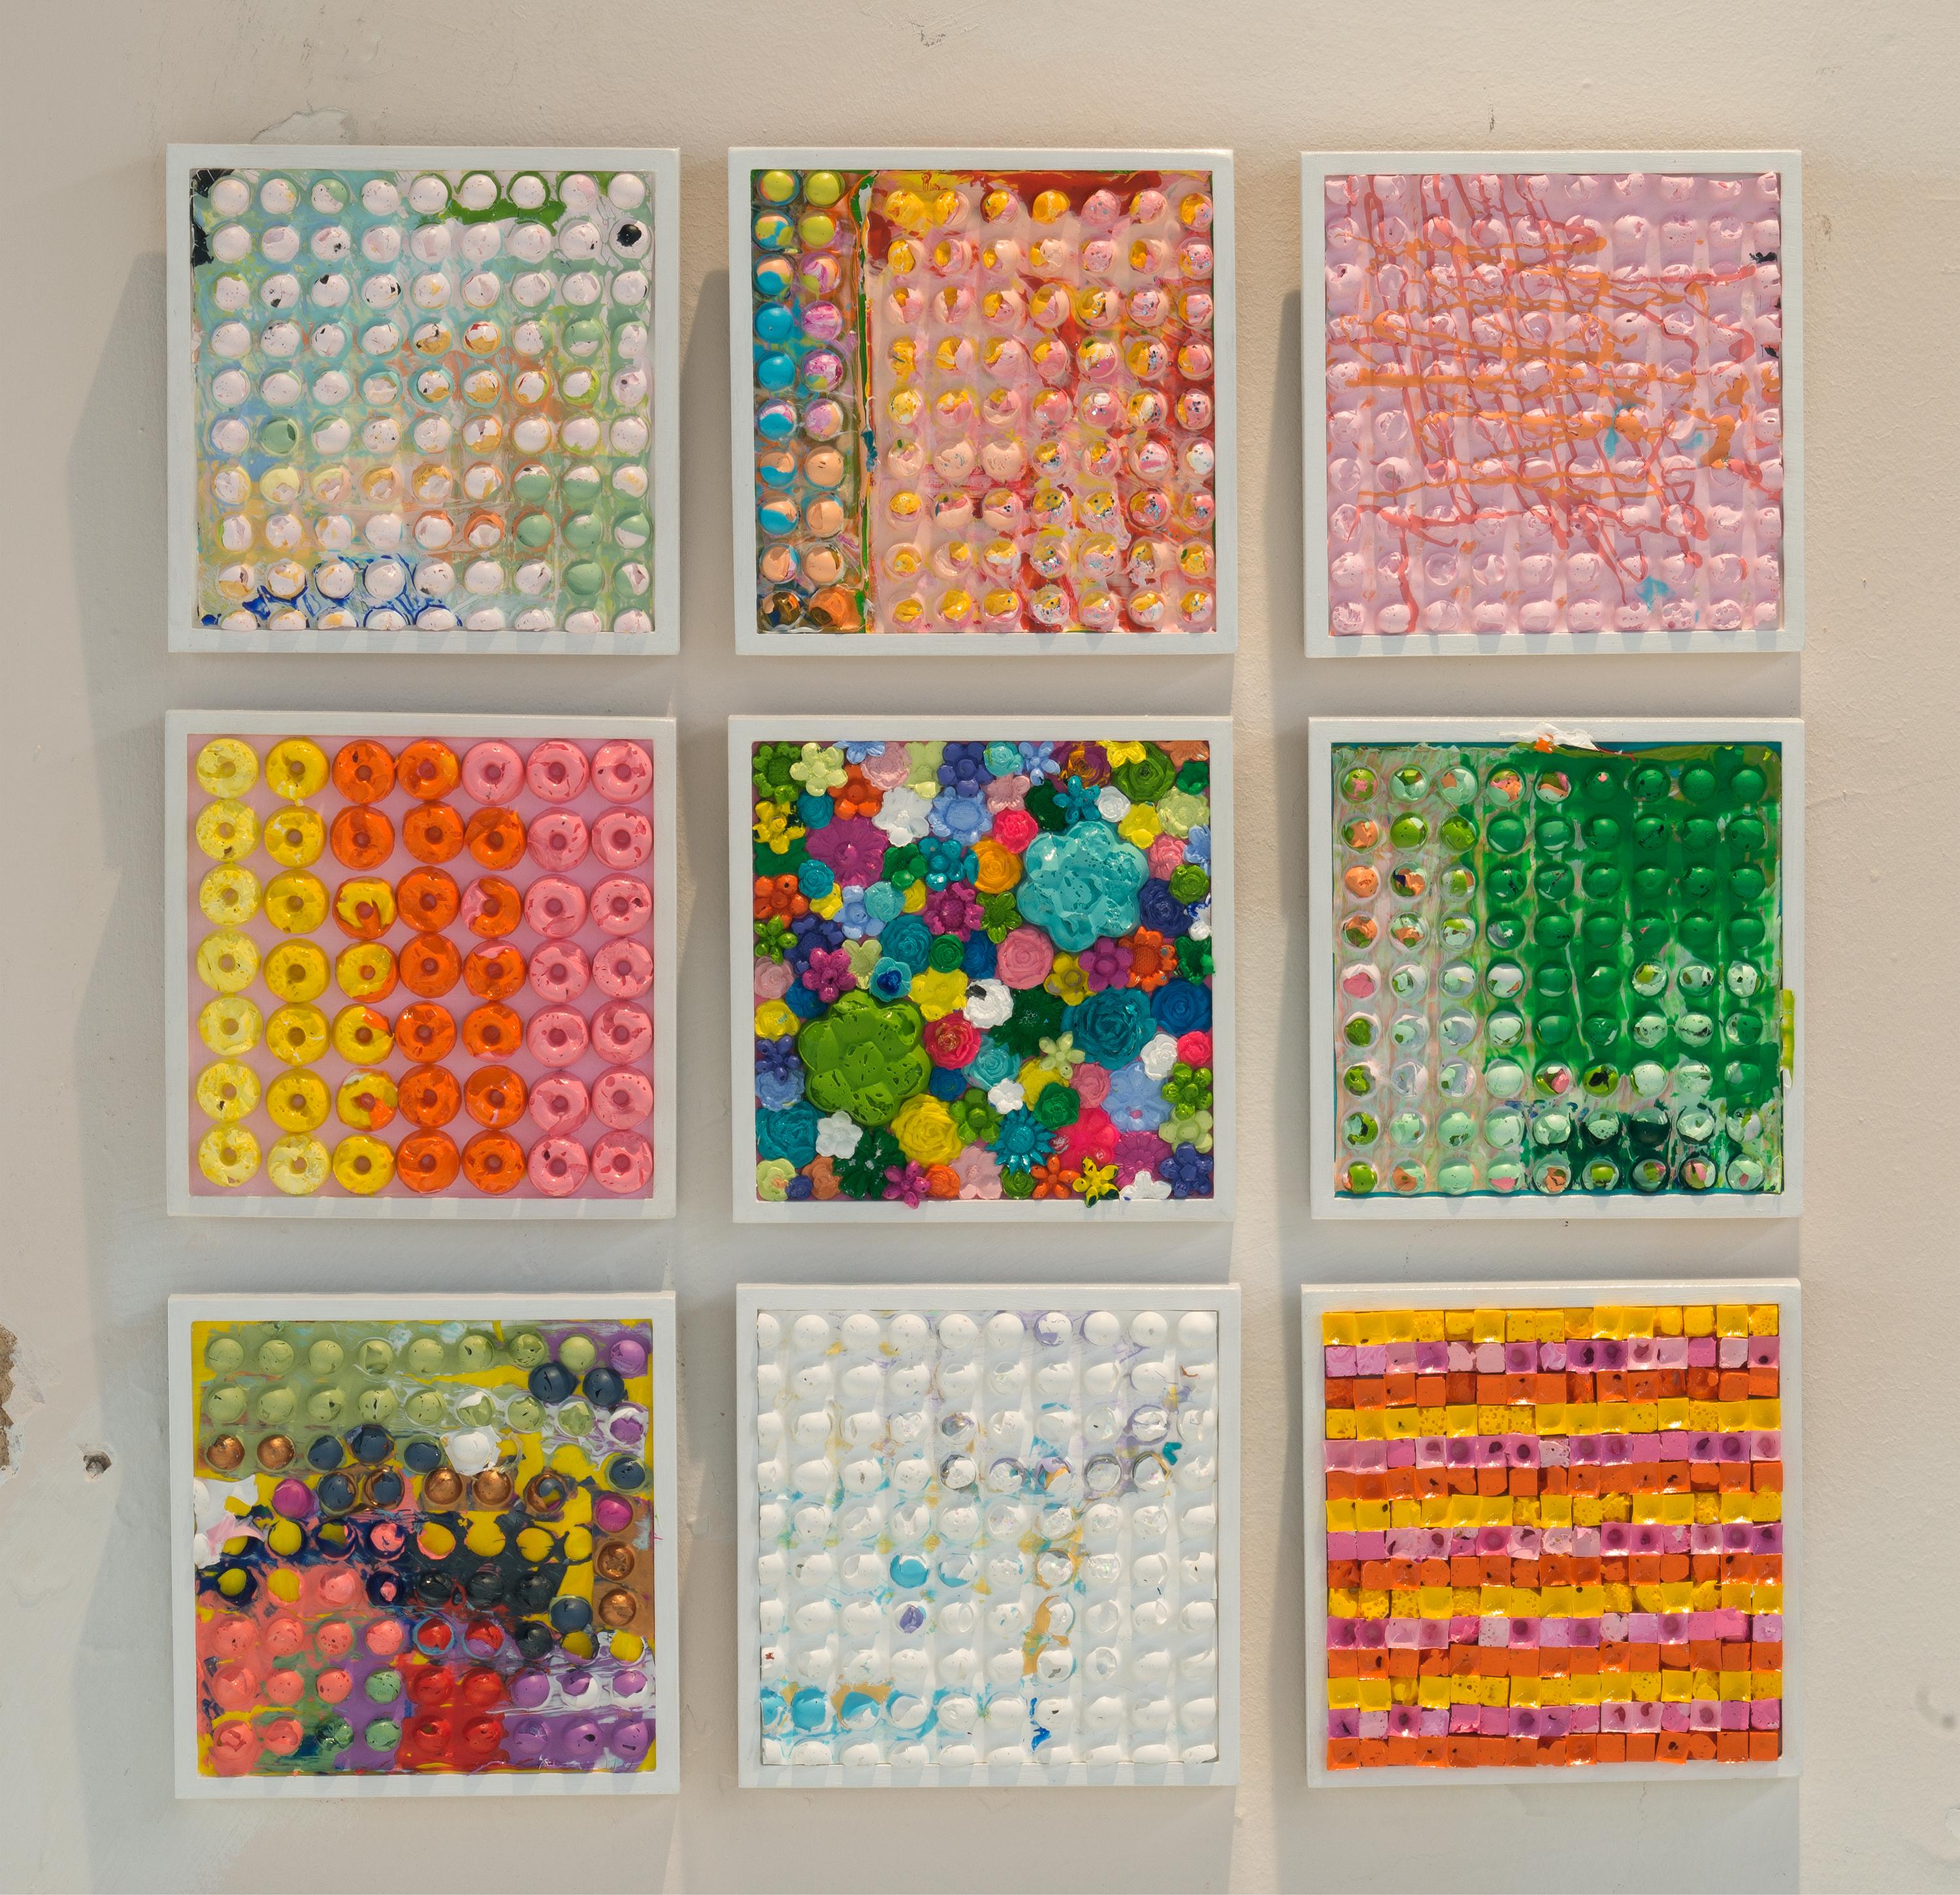 In MULTICOLOR CIRCLE QUILT, 1, Natalie Harrison draws on the historically domestic crafts of molding and quilting to create a new work of collage. Shaping this wide spectrum of colors, leftover from her past work, through a dog treat mold, she